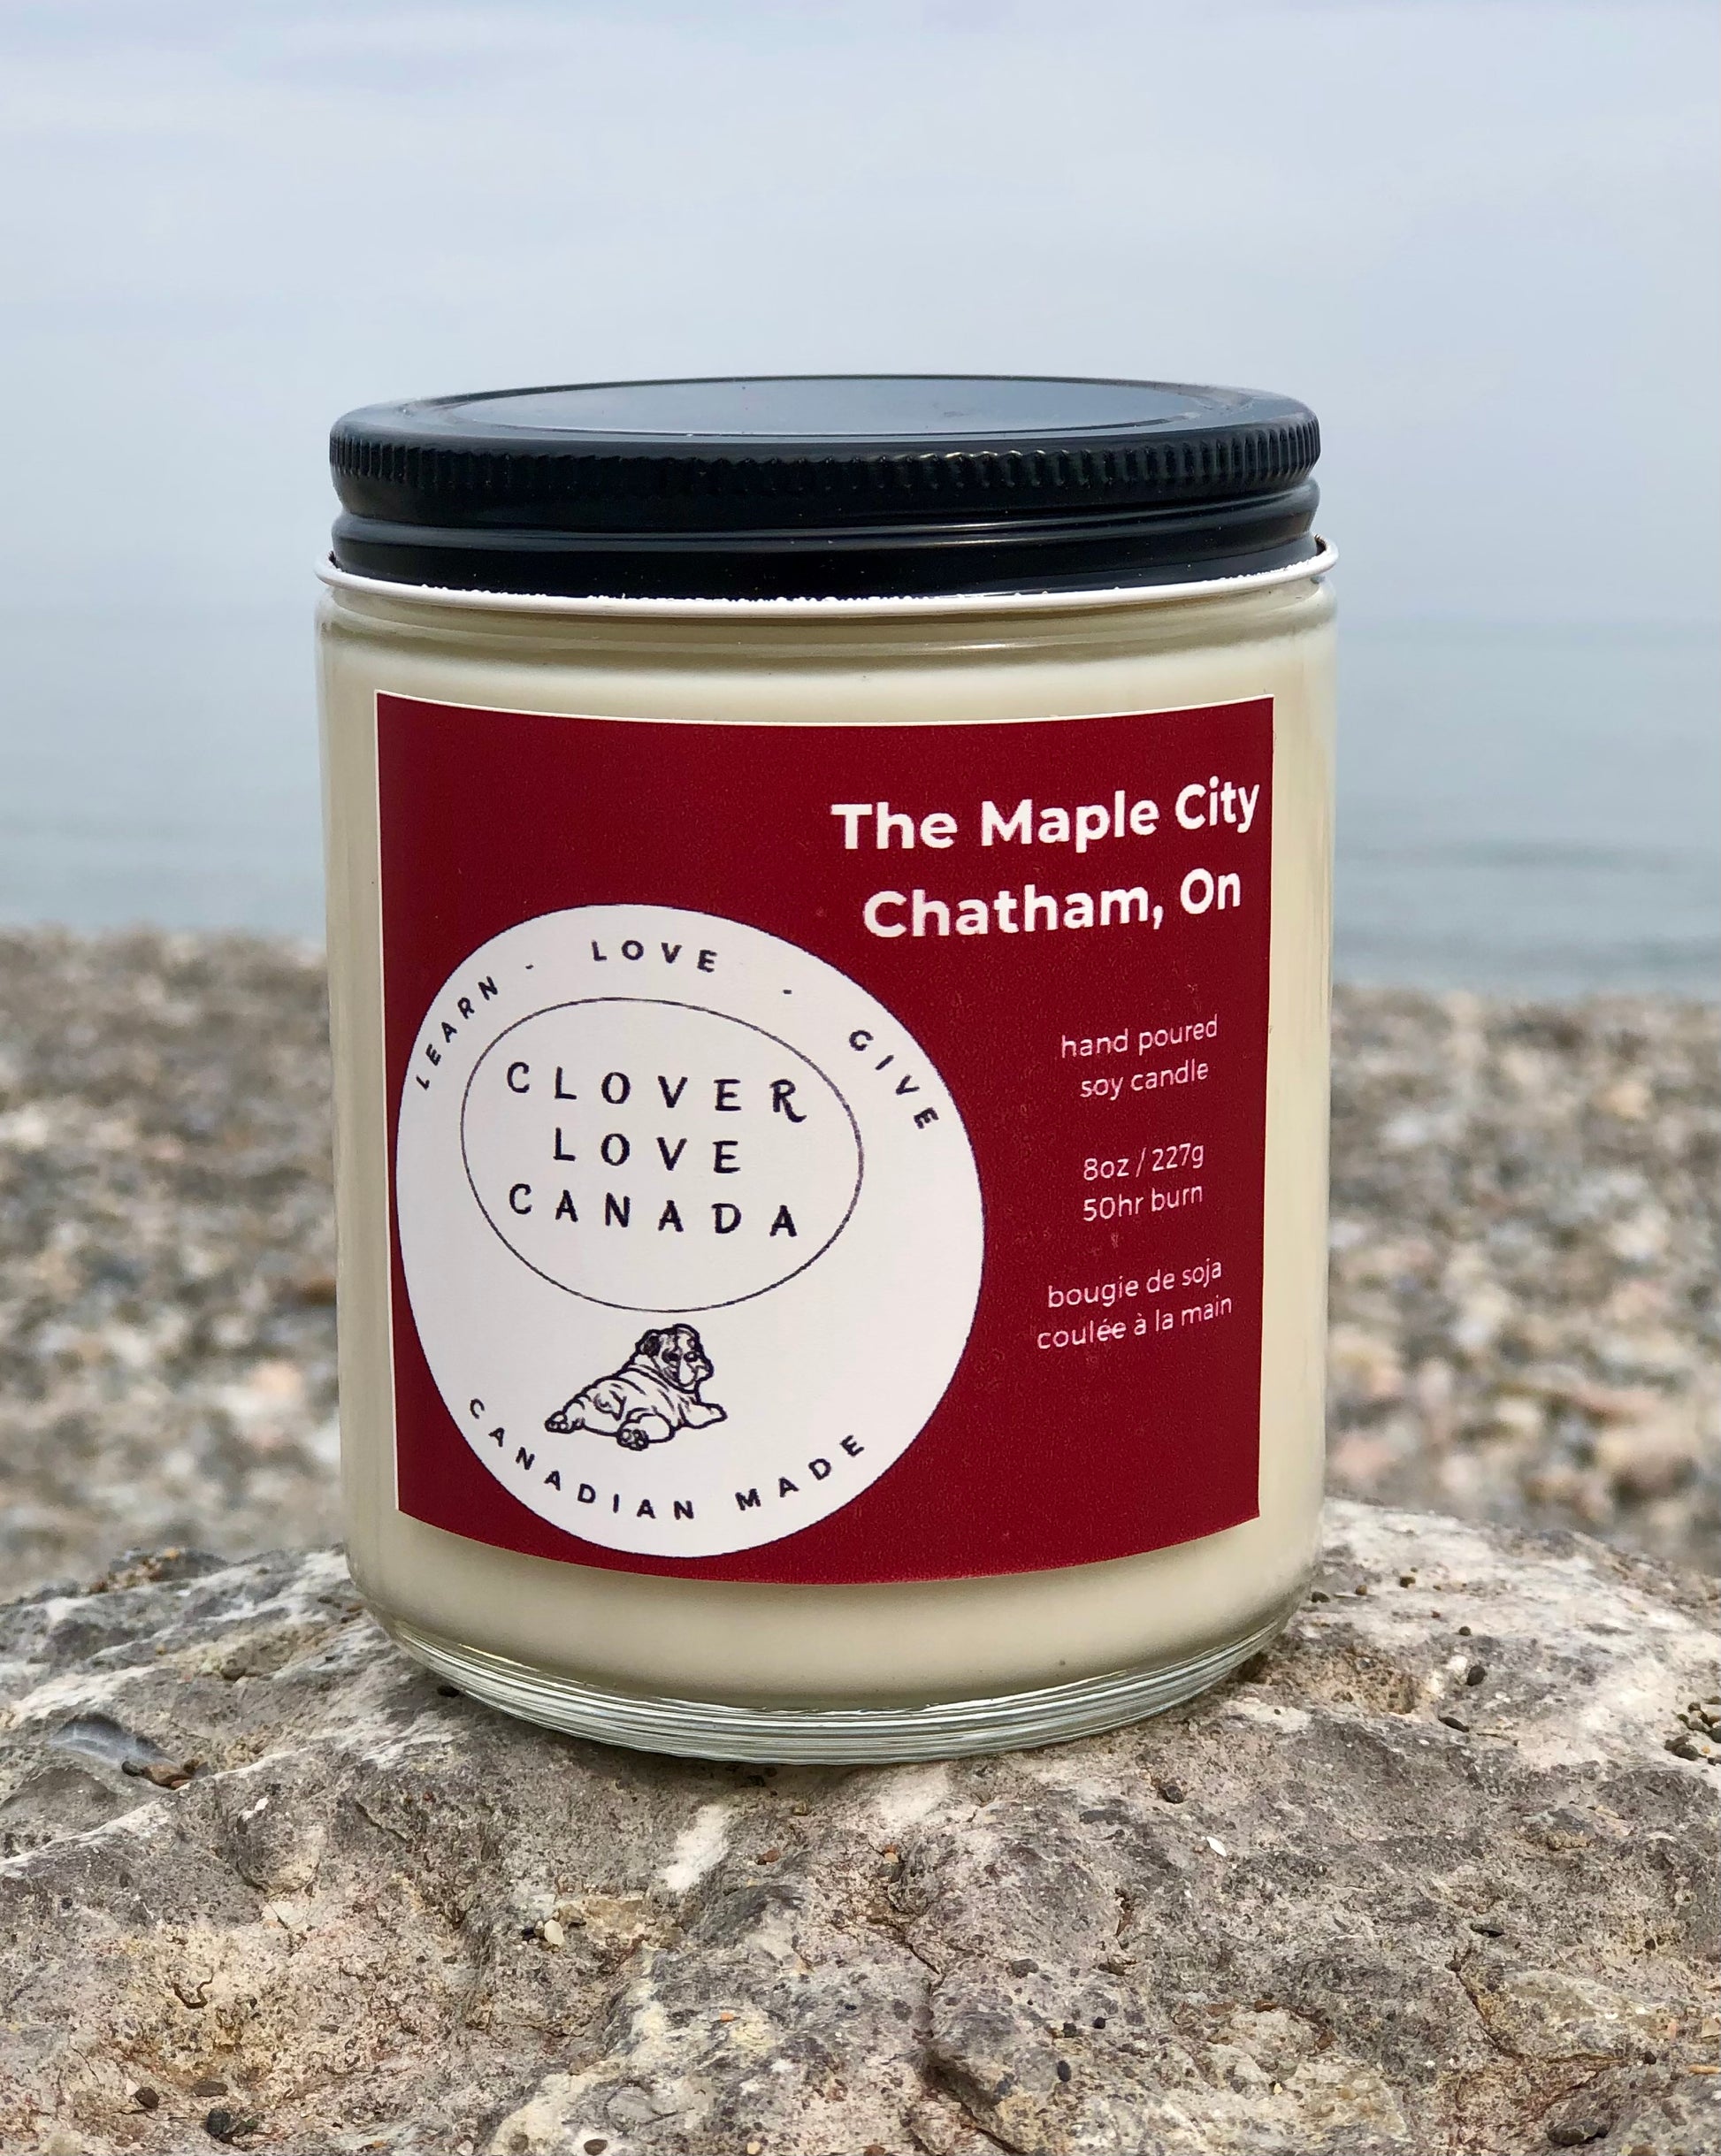 8 oz candle, red label, The Maple City, Chatham ON